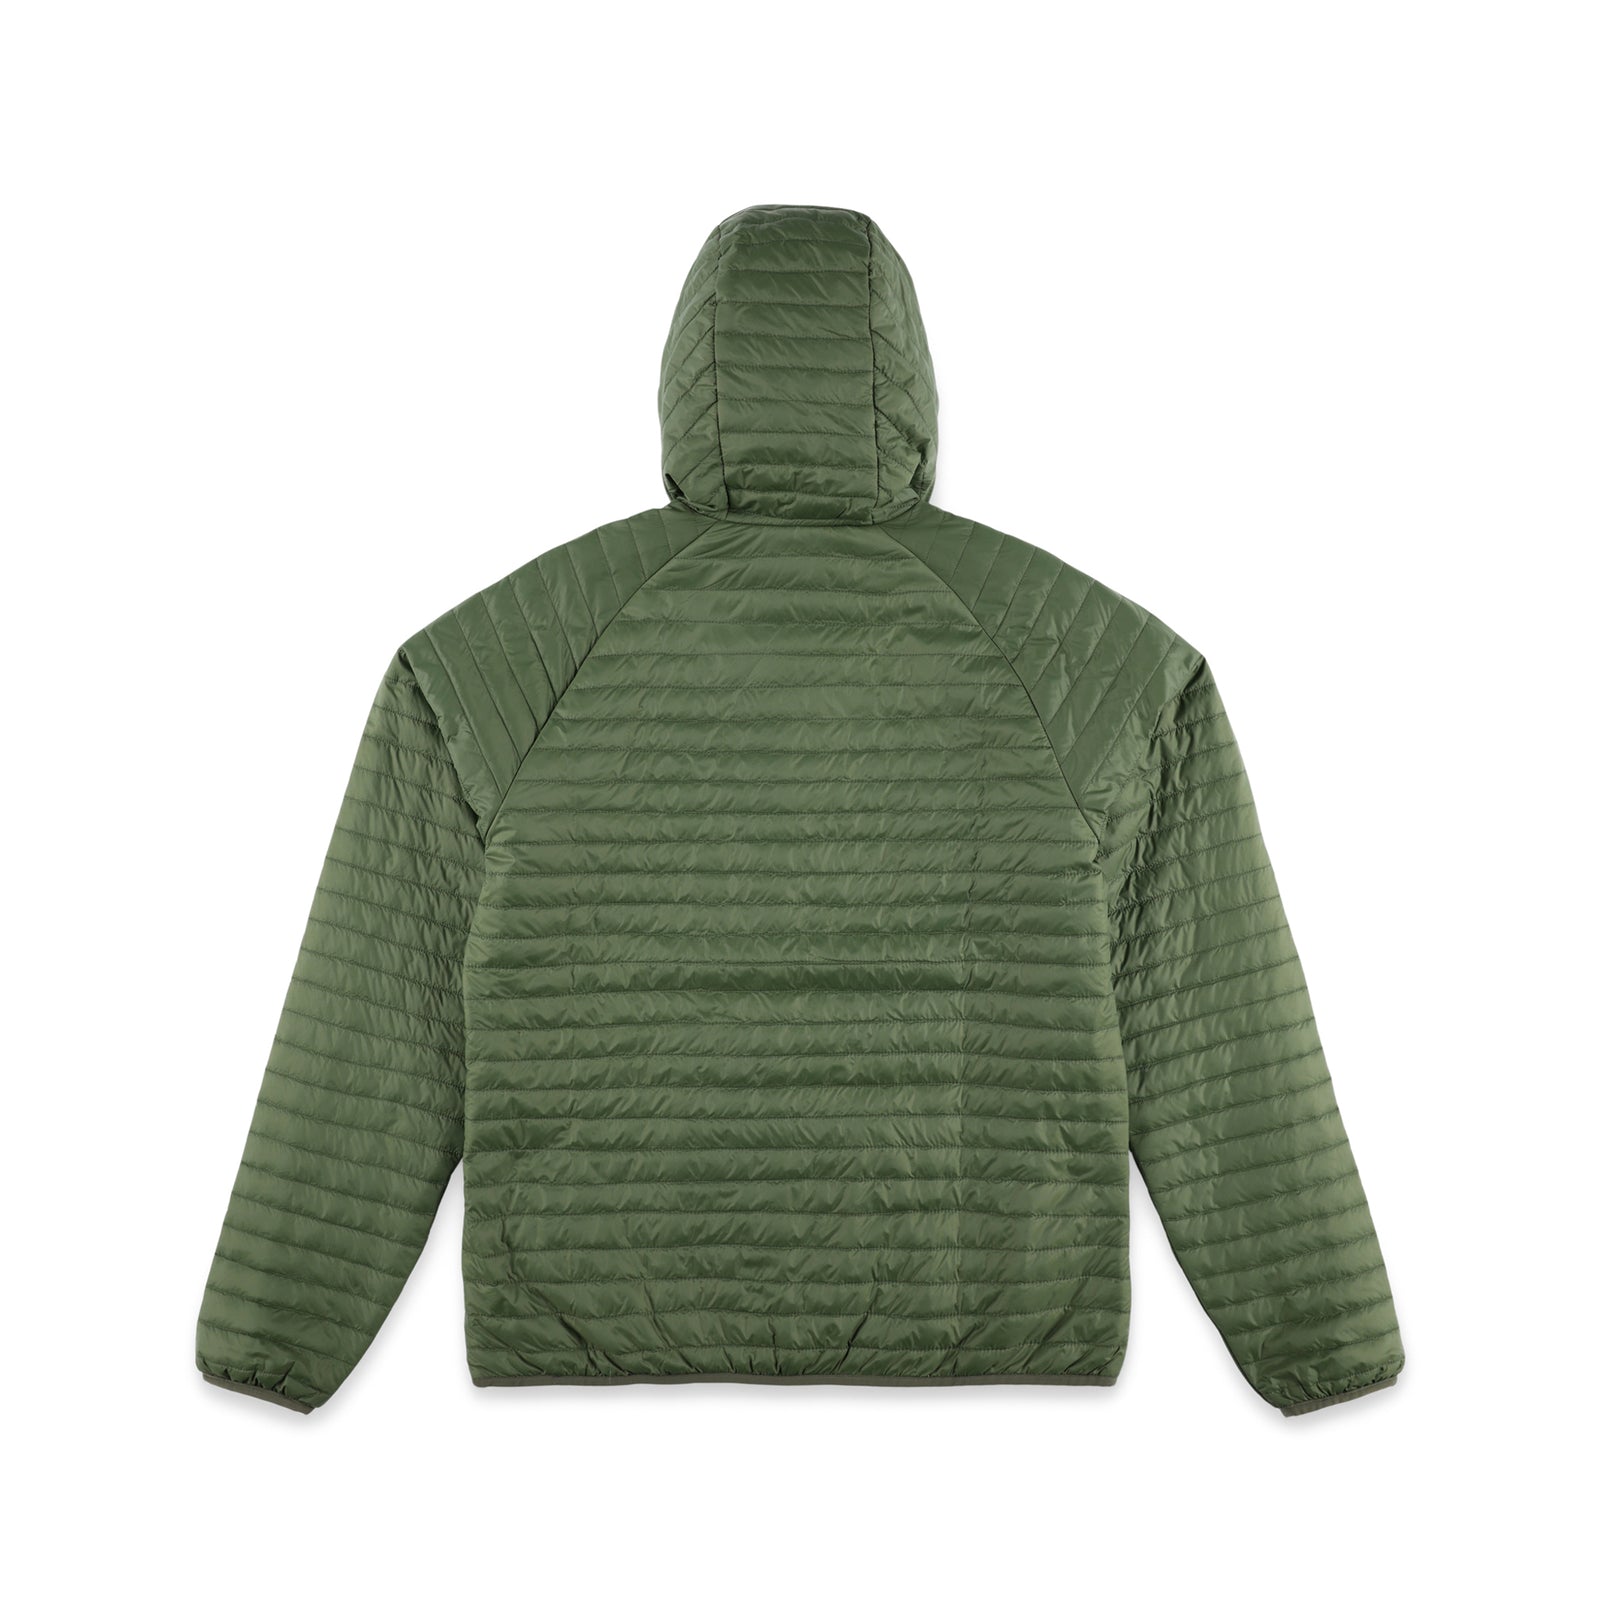 Back of Topo Designs Men's Global Puffer packable recycled insulated Hoodie jacket in "olive" green.